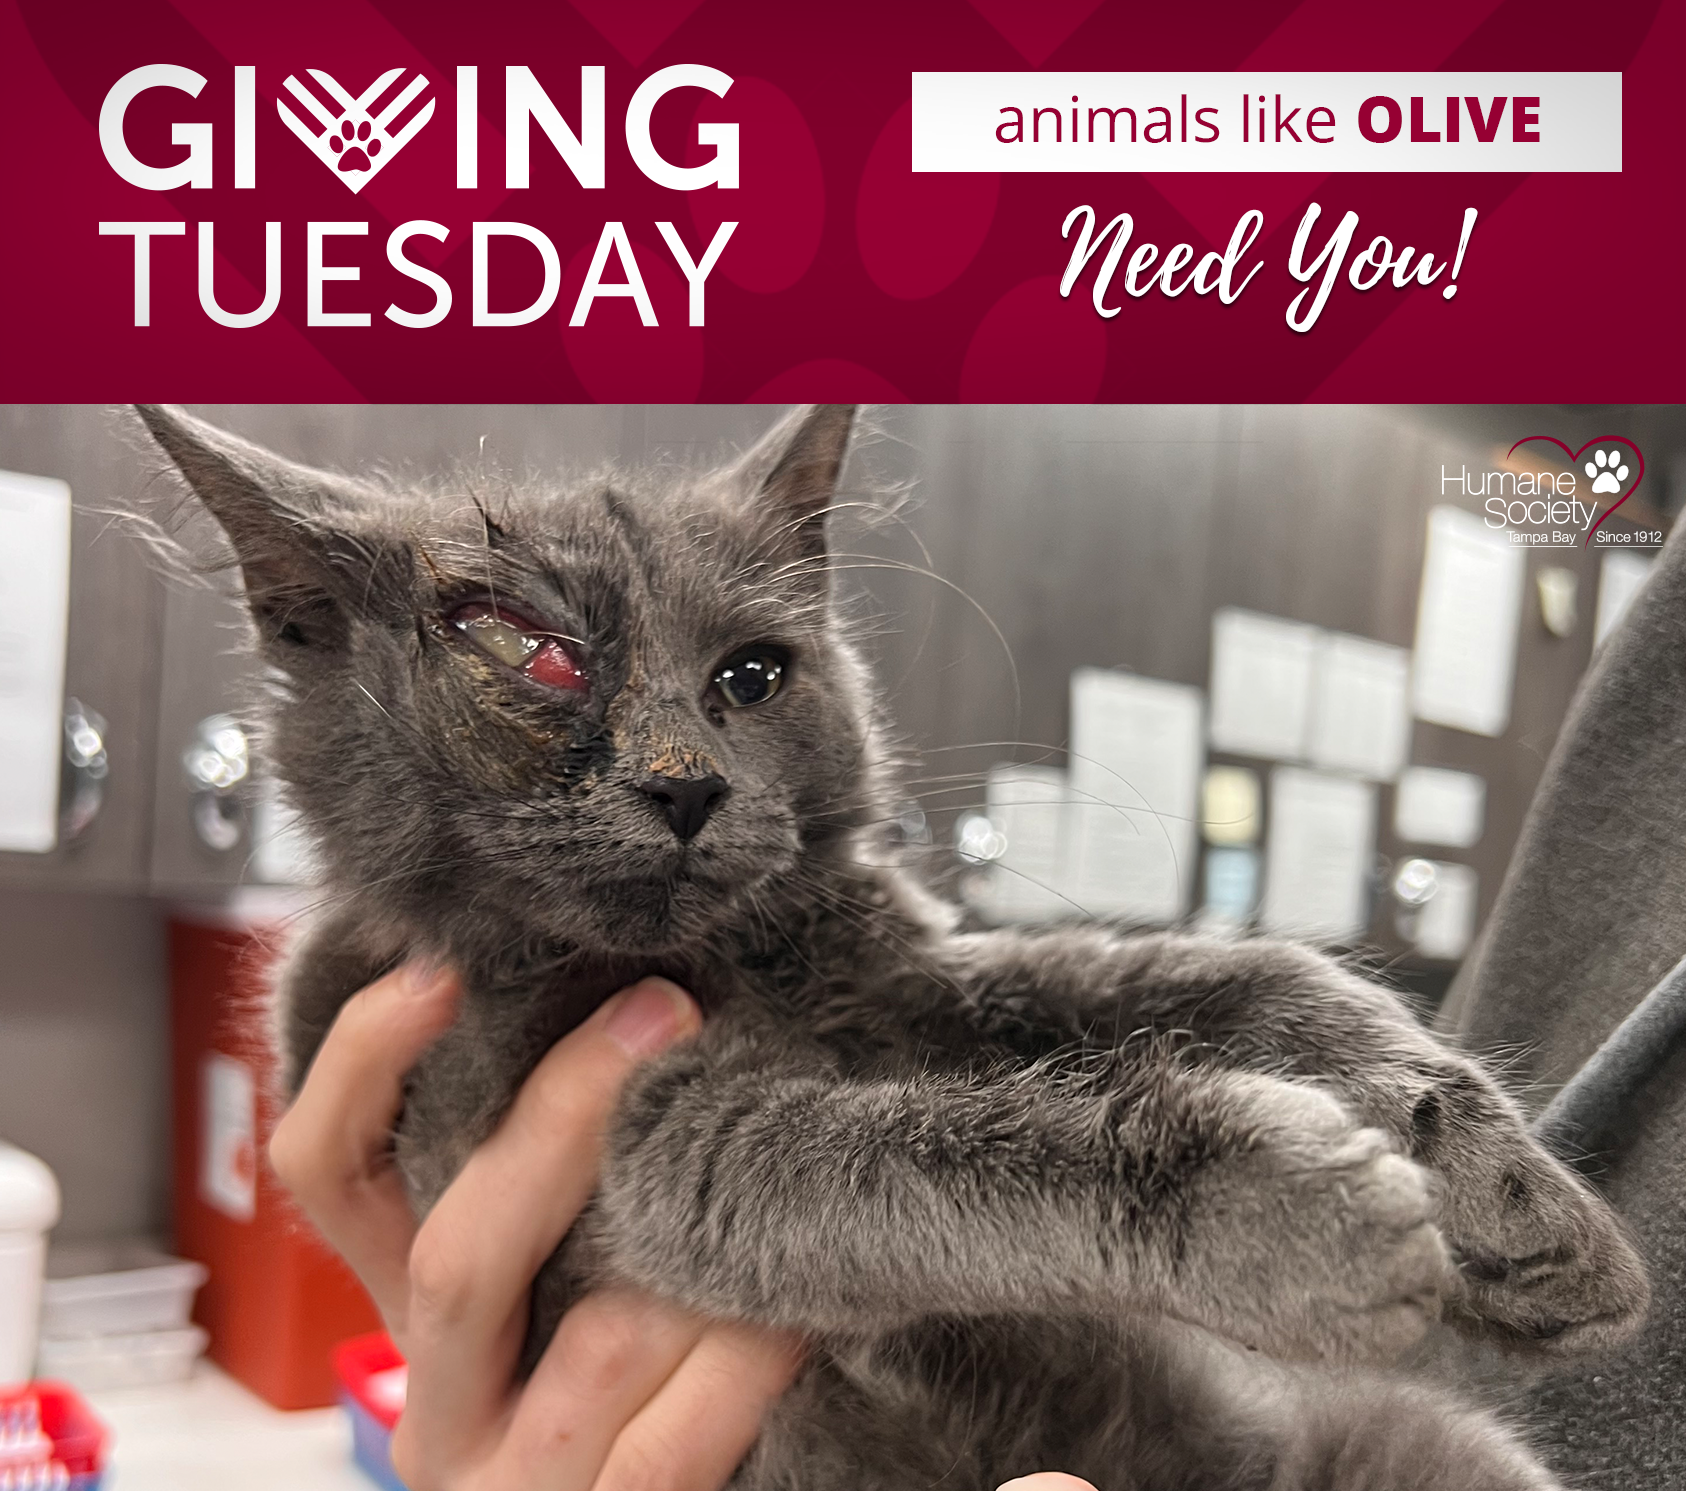 Giving Tuesday, Olive Needs You